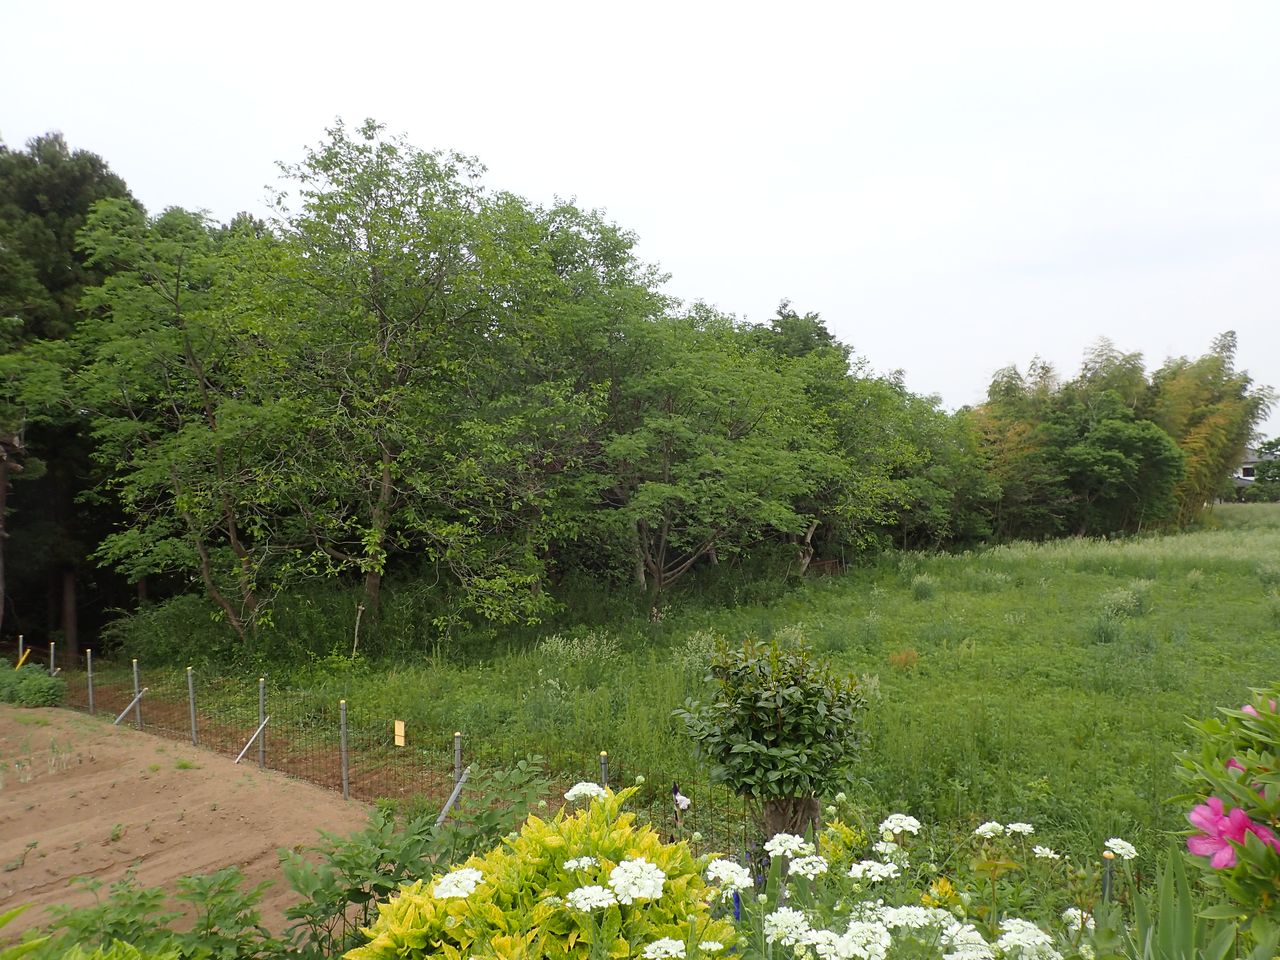 A field with a protective fence in a Fukushima area where evacuation orders have been lifted. Residents have been slow to return, as can be seen by the neighboring abandoned plot, and measures must be made to keep boars from damaging crops and property.